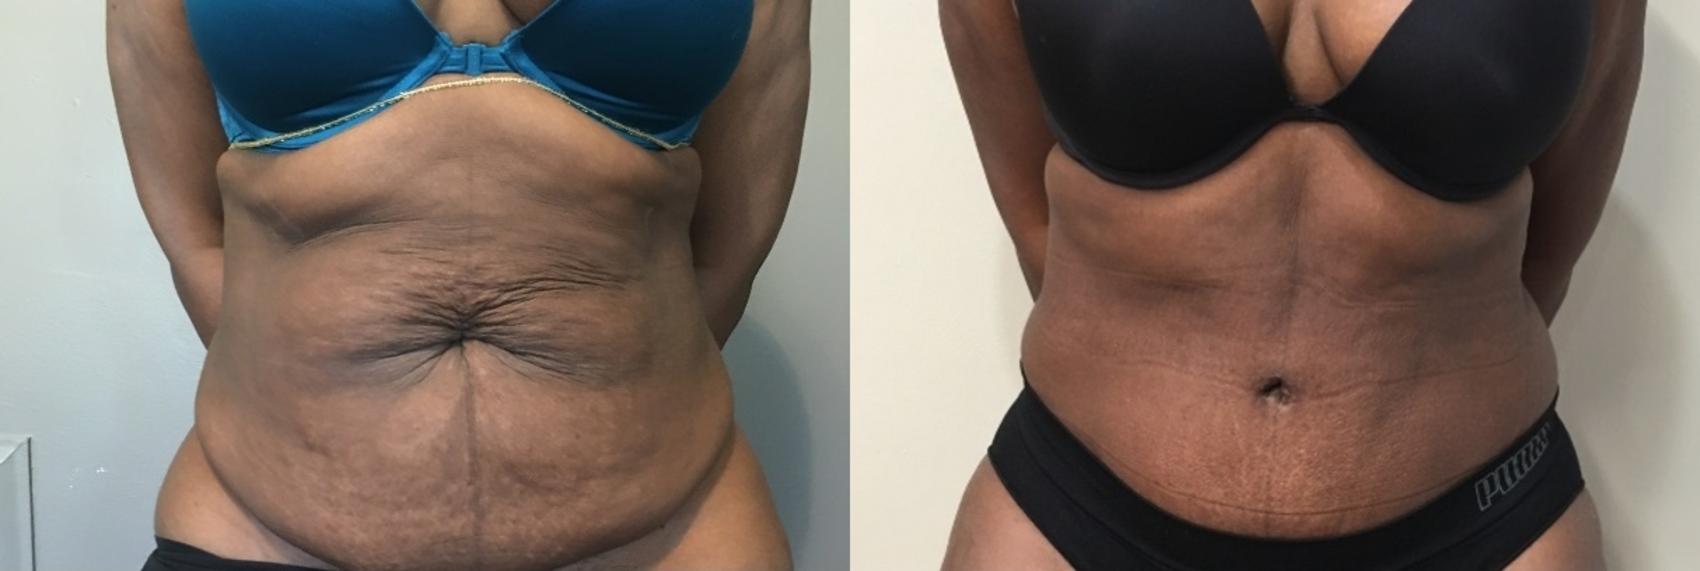 Keeping It Real: Can a Tummy Tuck Really Give Me a Flat, Toned Tummy?